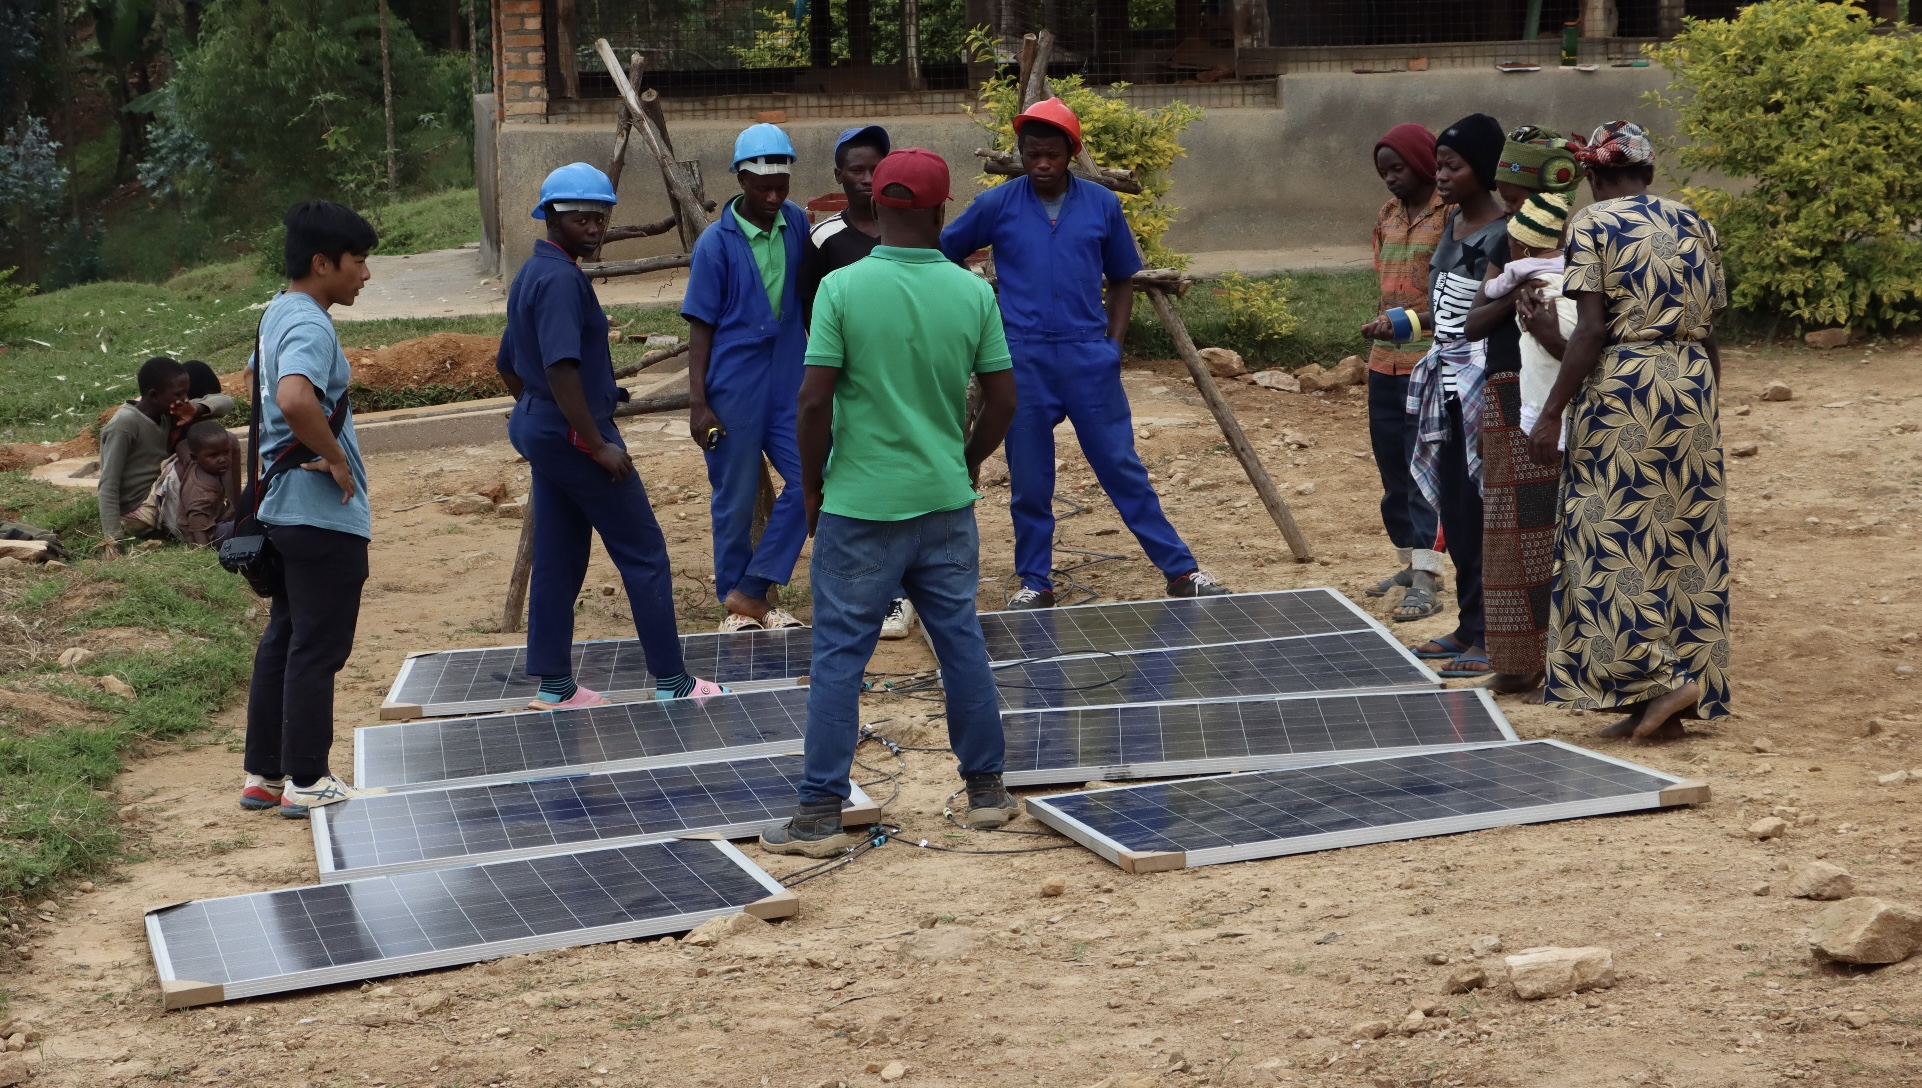 Working with technical students on how to ensure proper solar connections